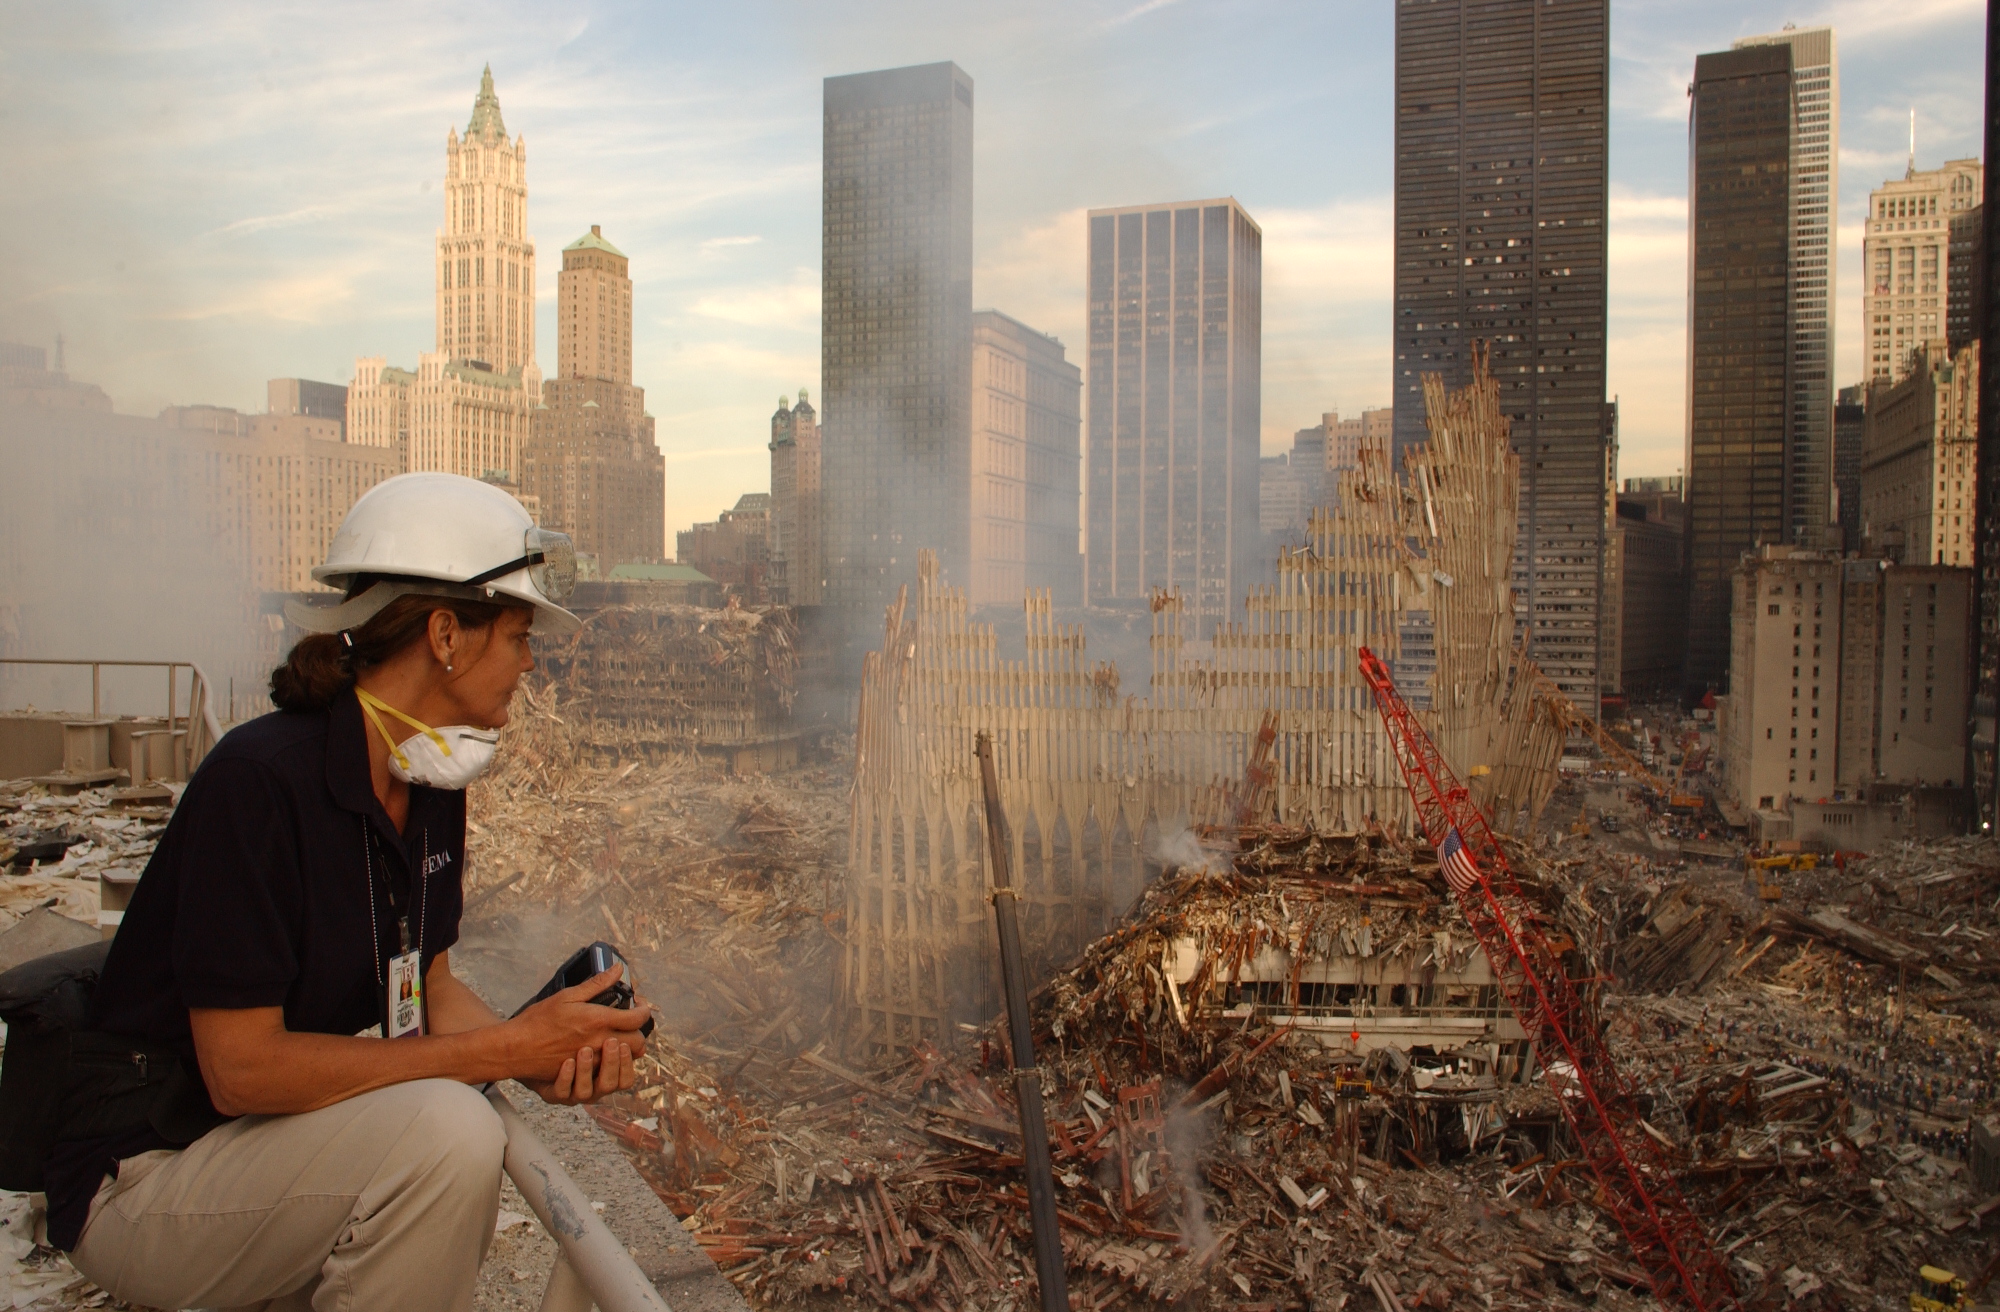 FEMA photographer Andrea Booher looks down at smoking piles of debris at Ground Zero on an evening shortly after the 9/11 attacks. She is wearing a hardhat and a mask as she holds a camera in her hands. The skyscrapers of lower Manhattan are in the distance. Two cranes are in the foreground.